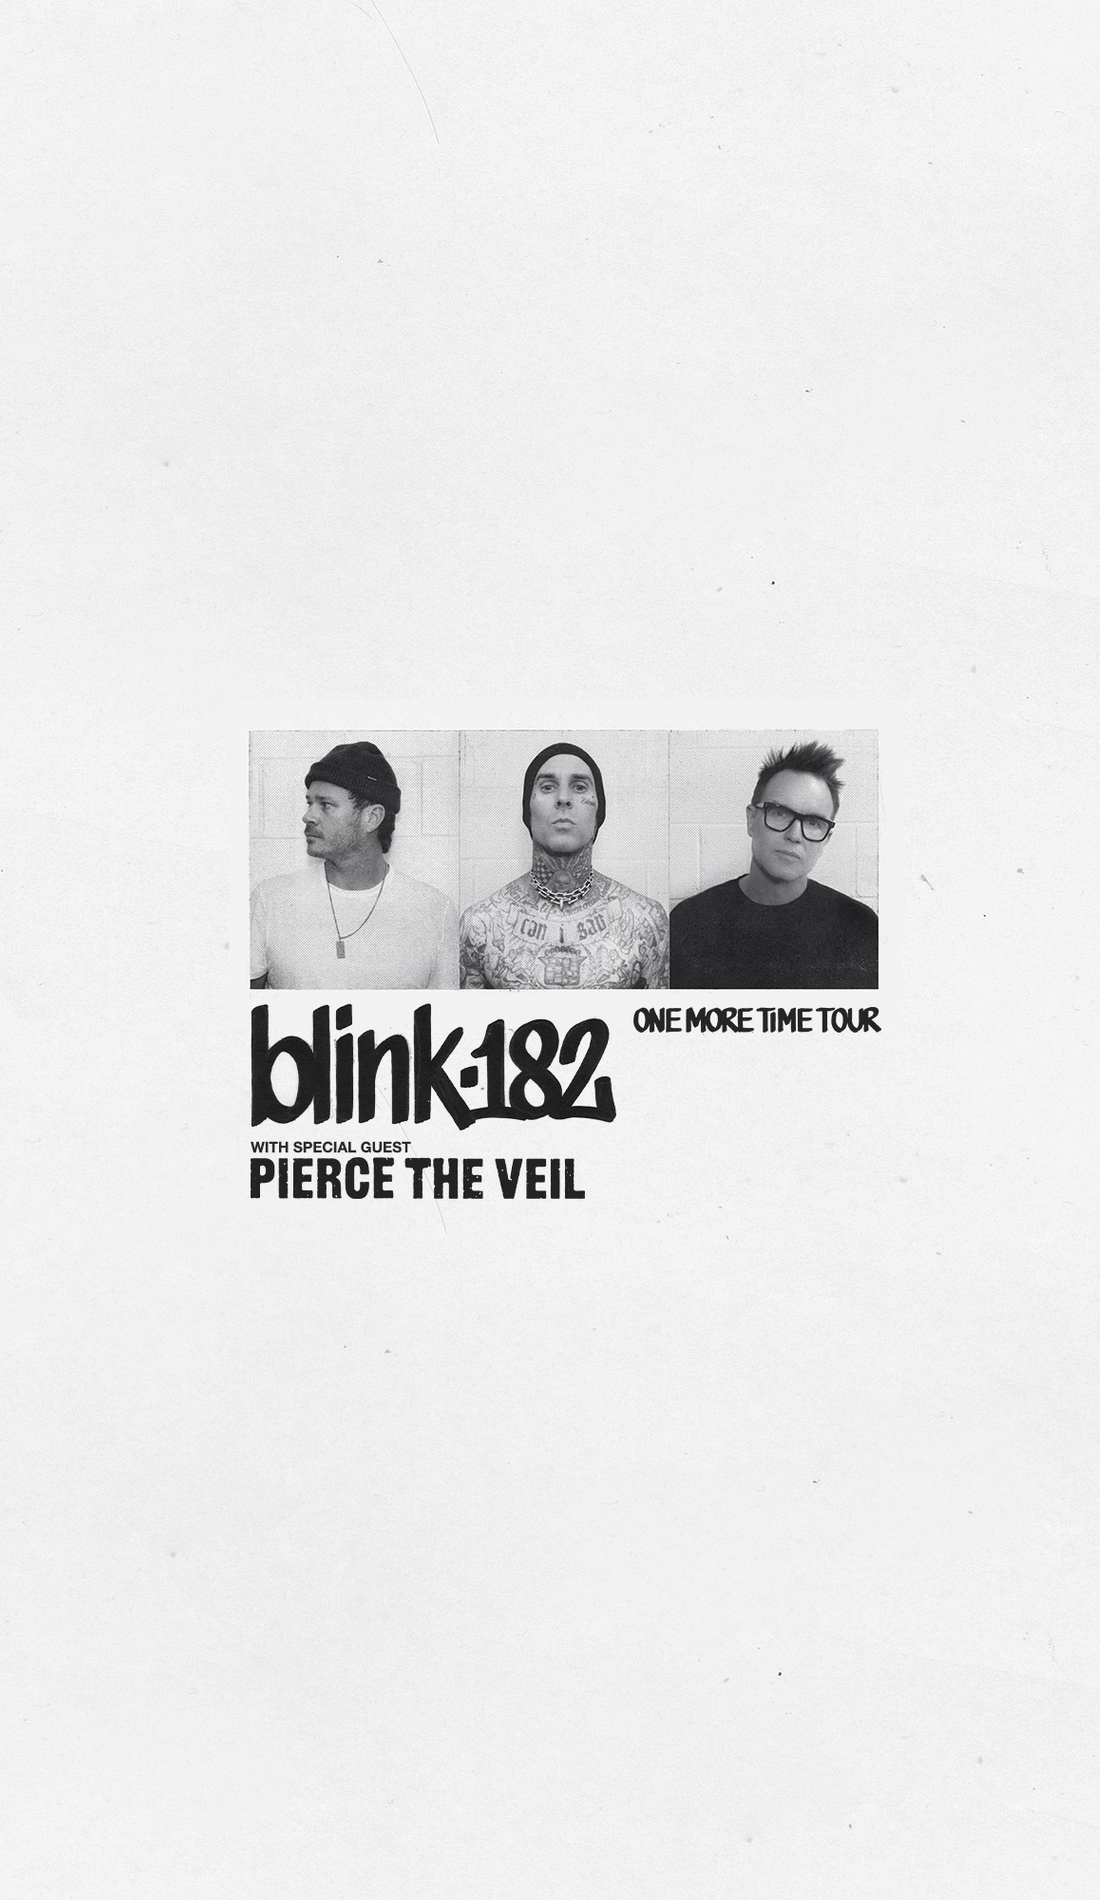 A blink-182 live event